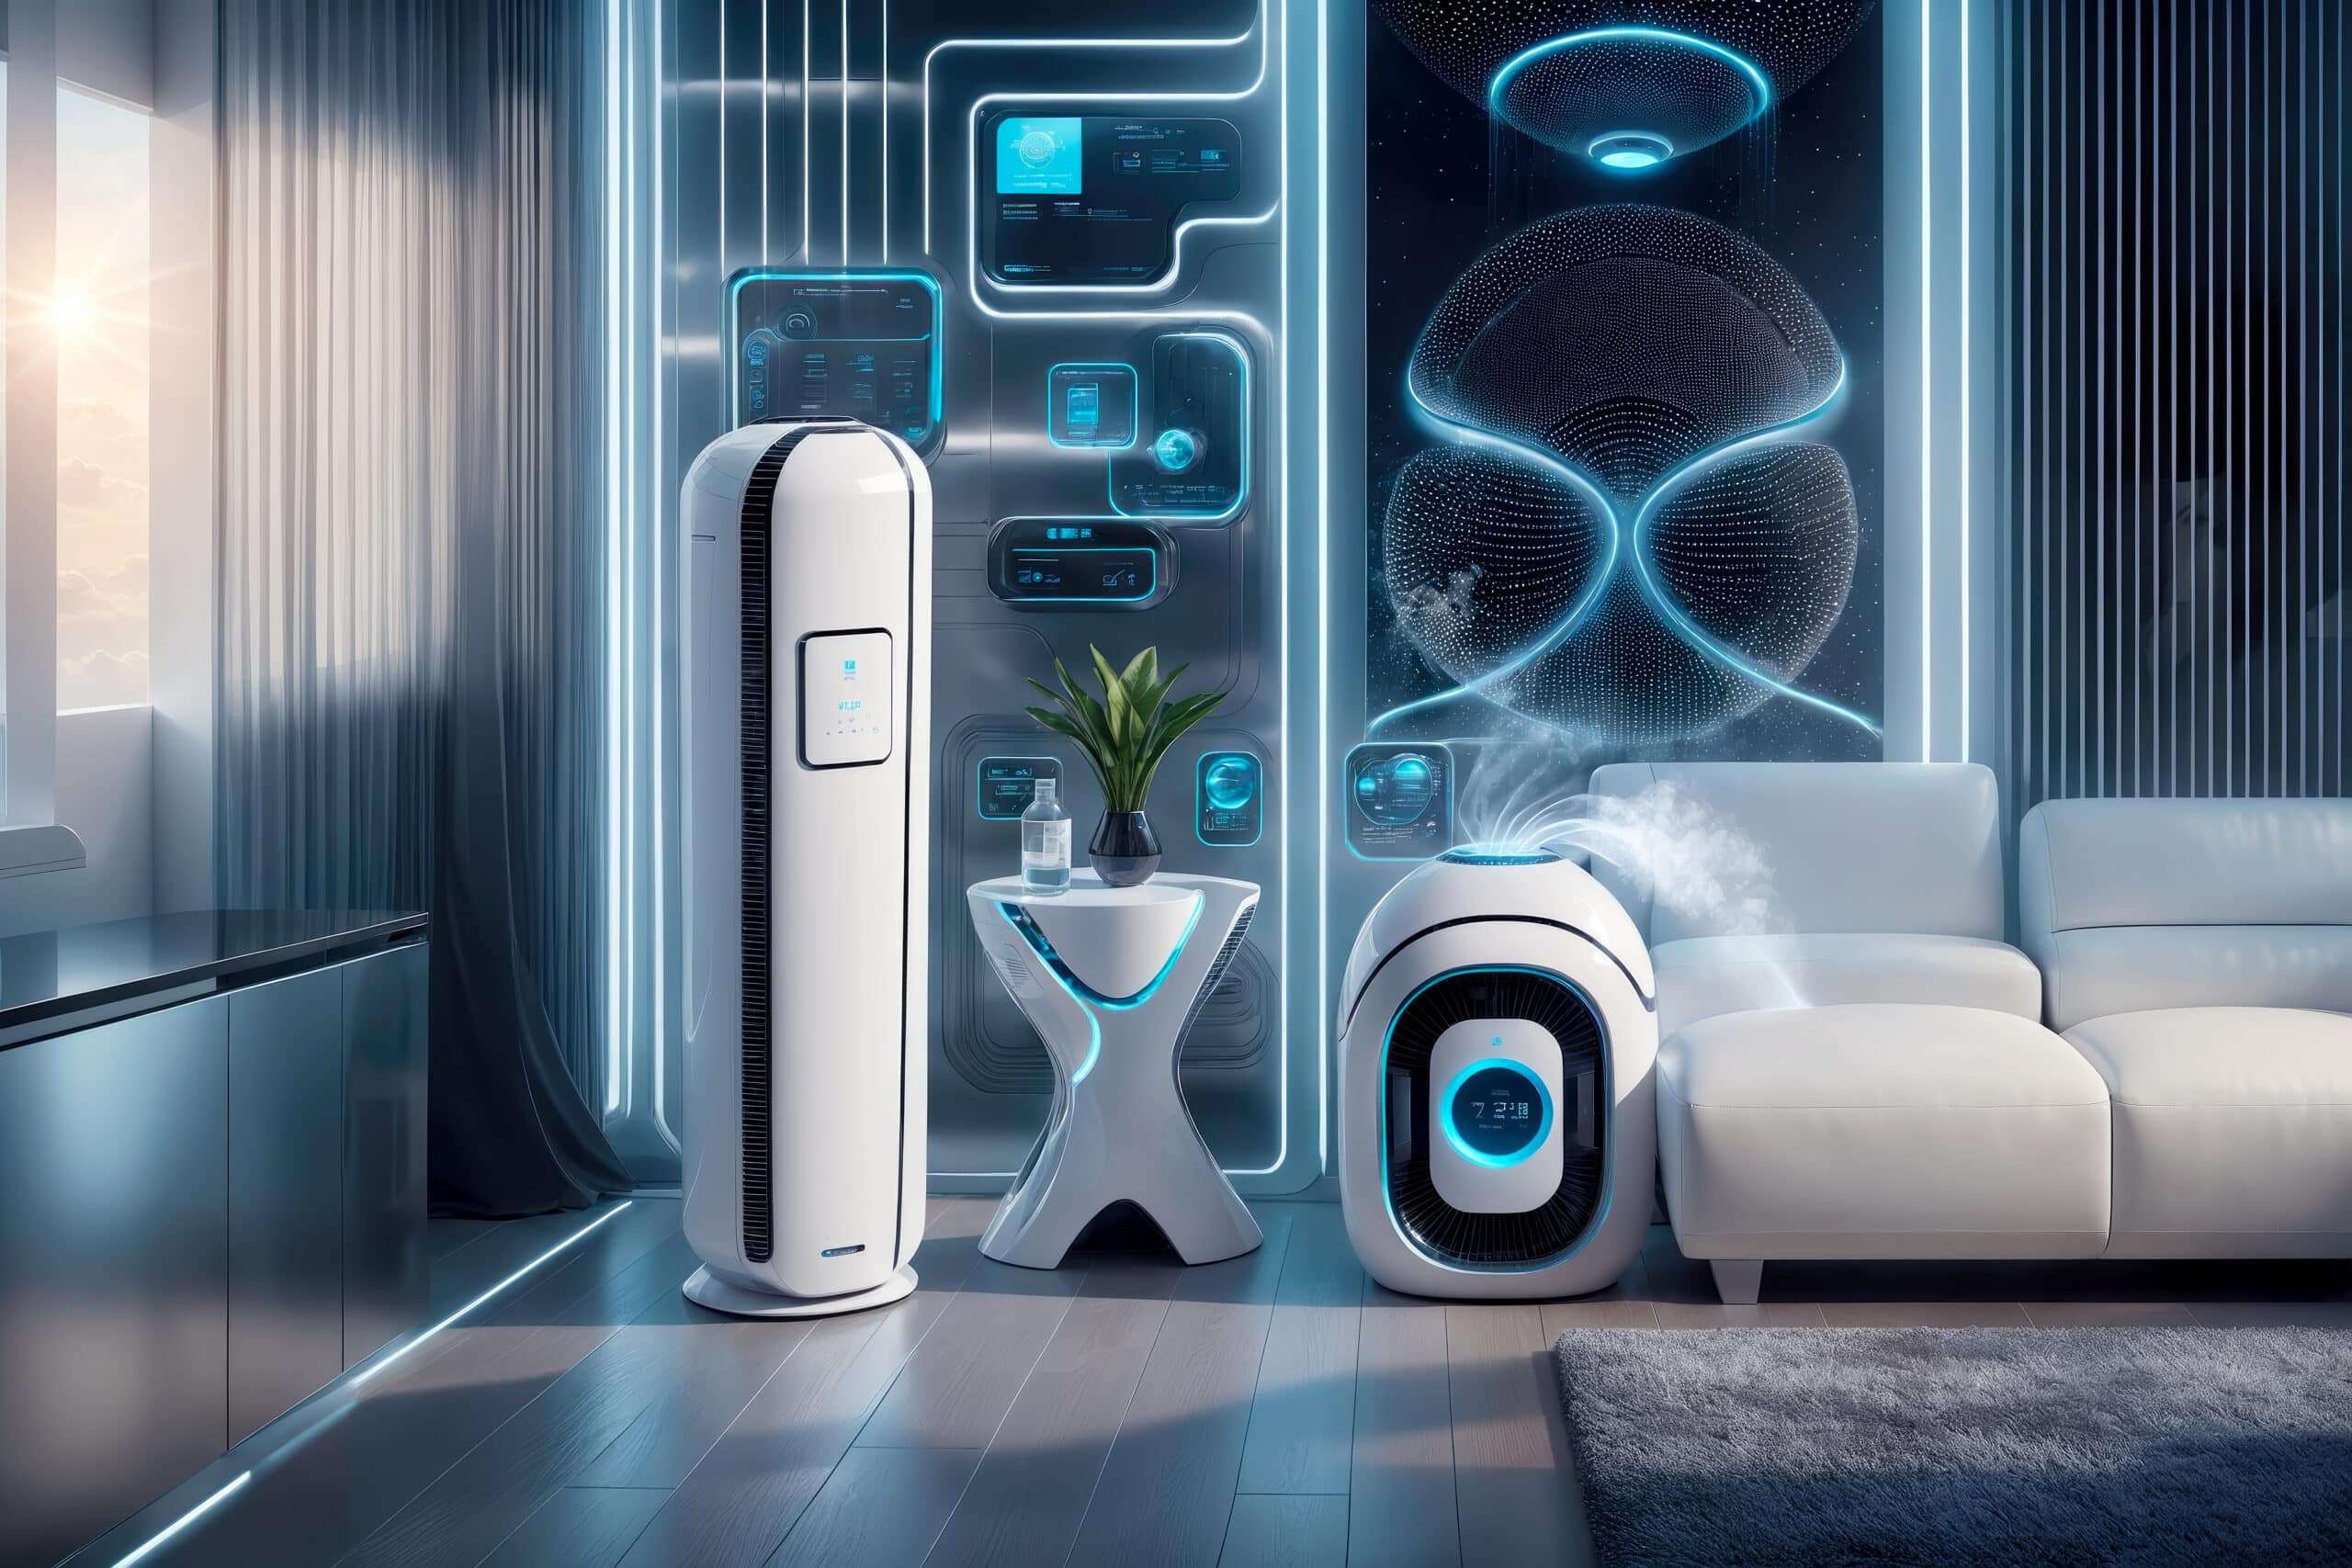 www.appr.com : Can air purifiers improve the overall indoor air quality of my home, even in a polluted area?